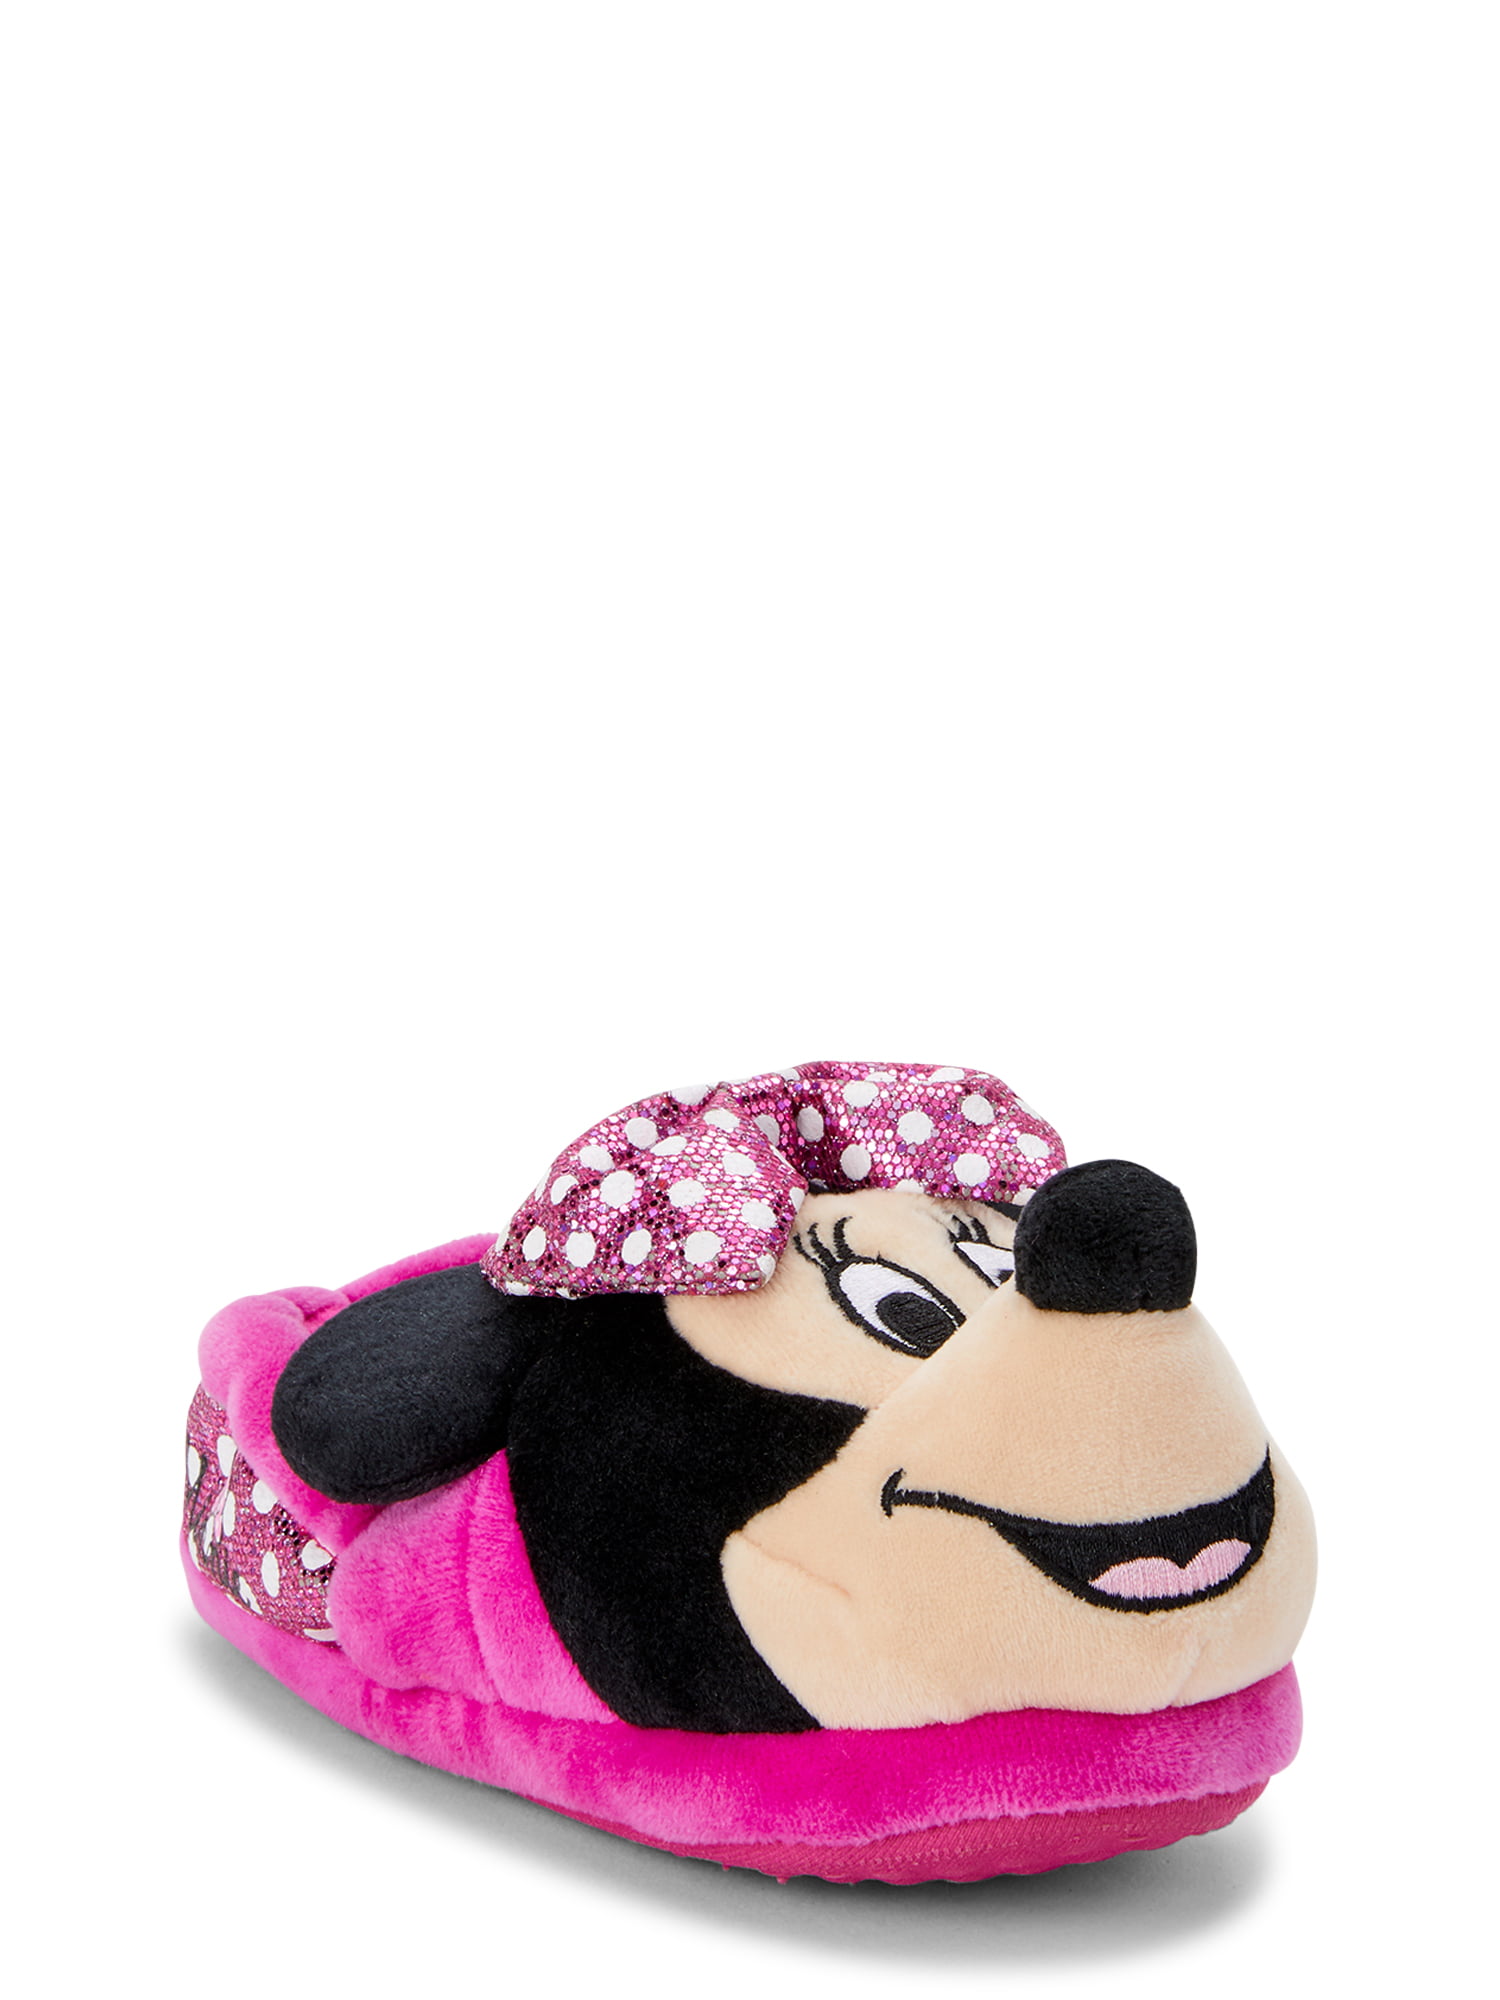 Disney Minnie Mouse slippers with fleece and non-slip knobs. 